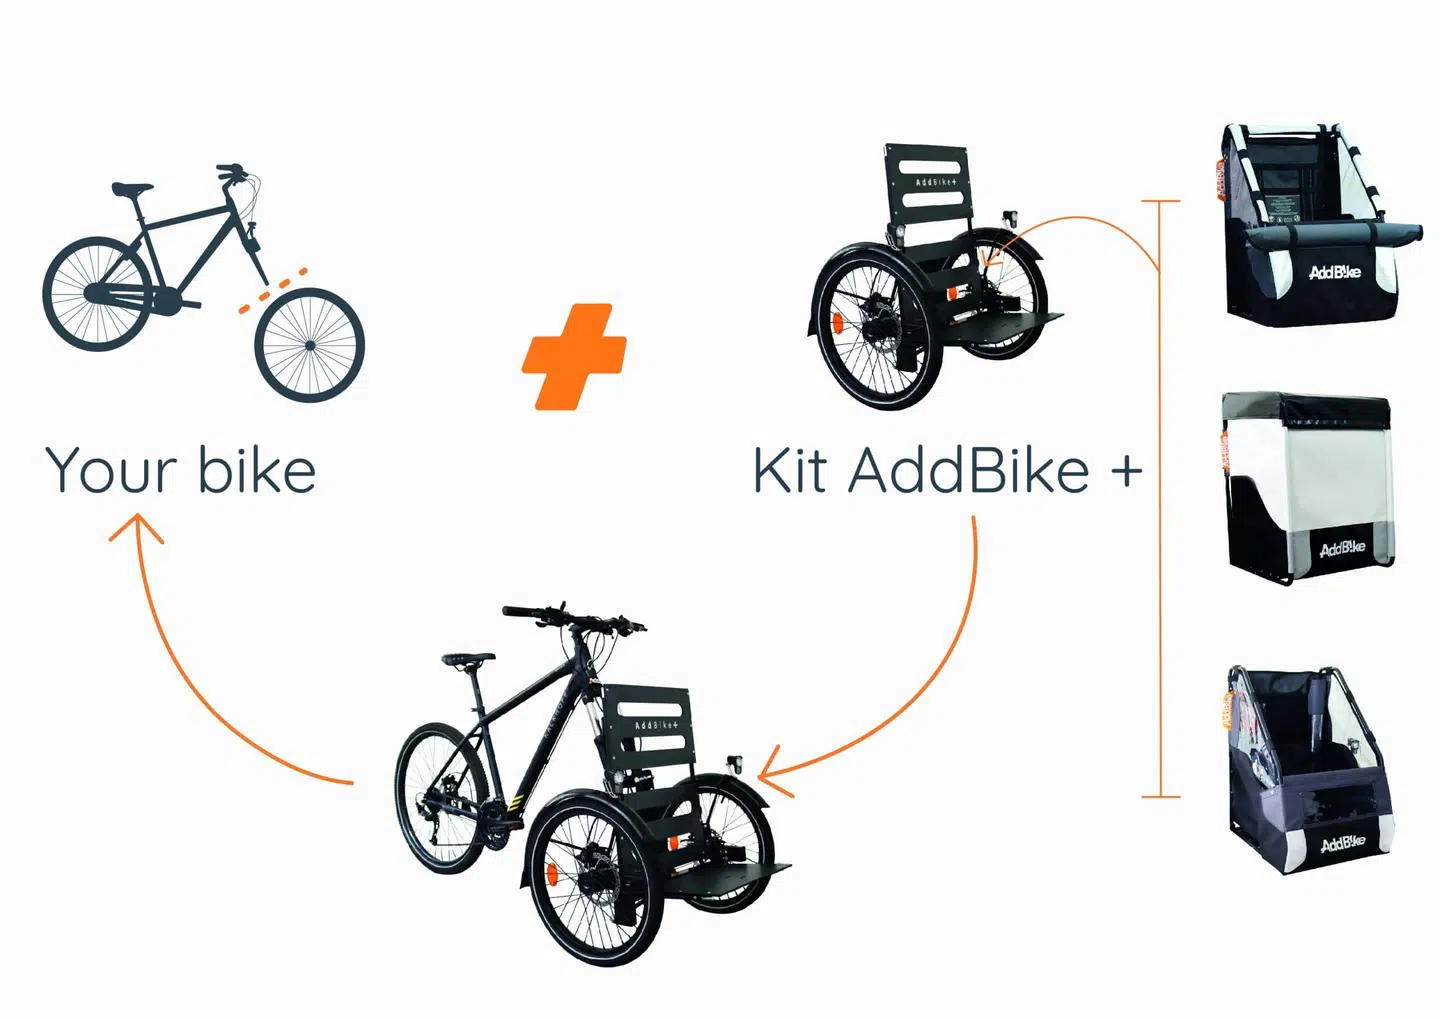 3 wheel bike options available at AddBike to transform your current bike in a trike